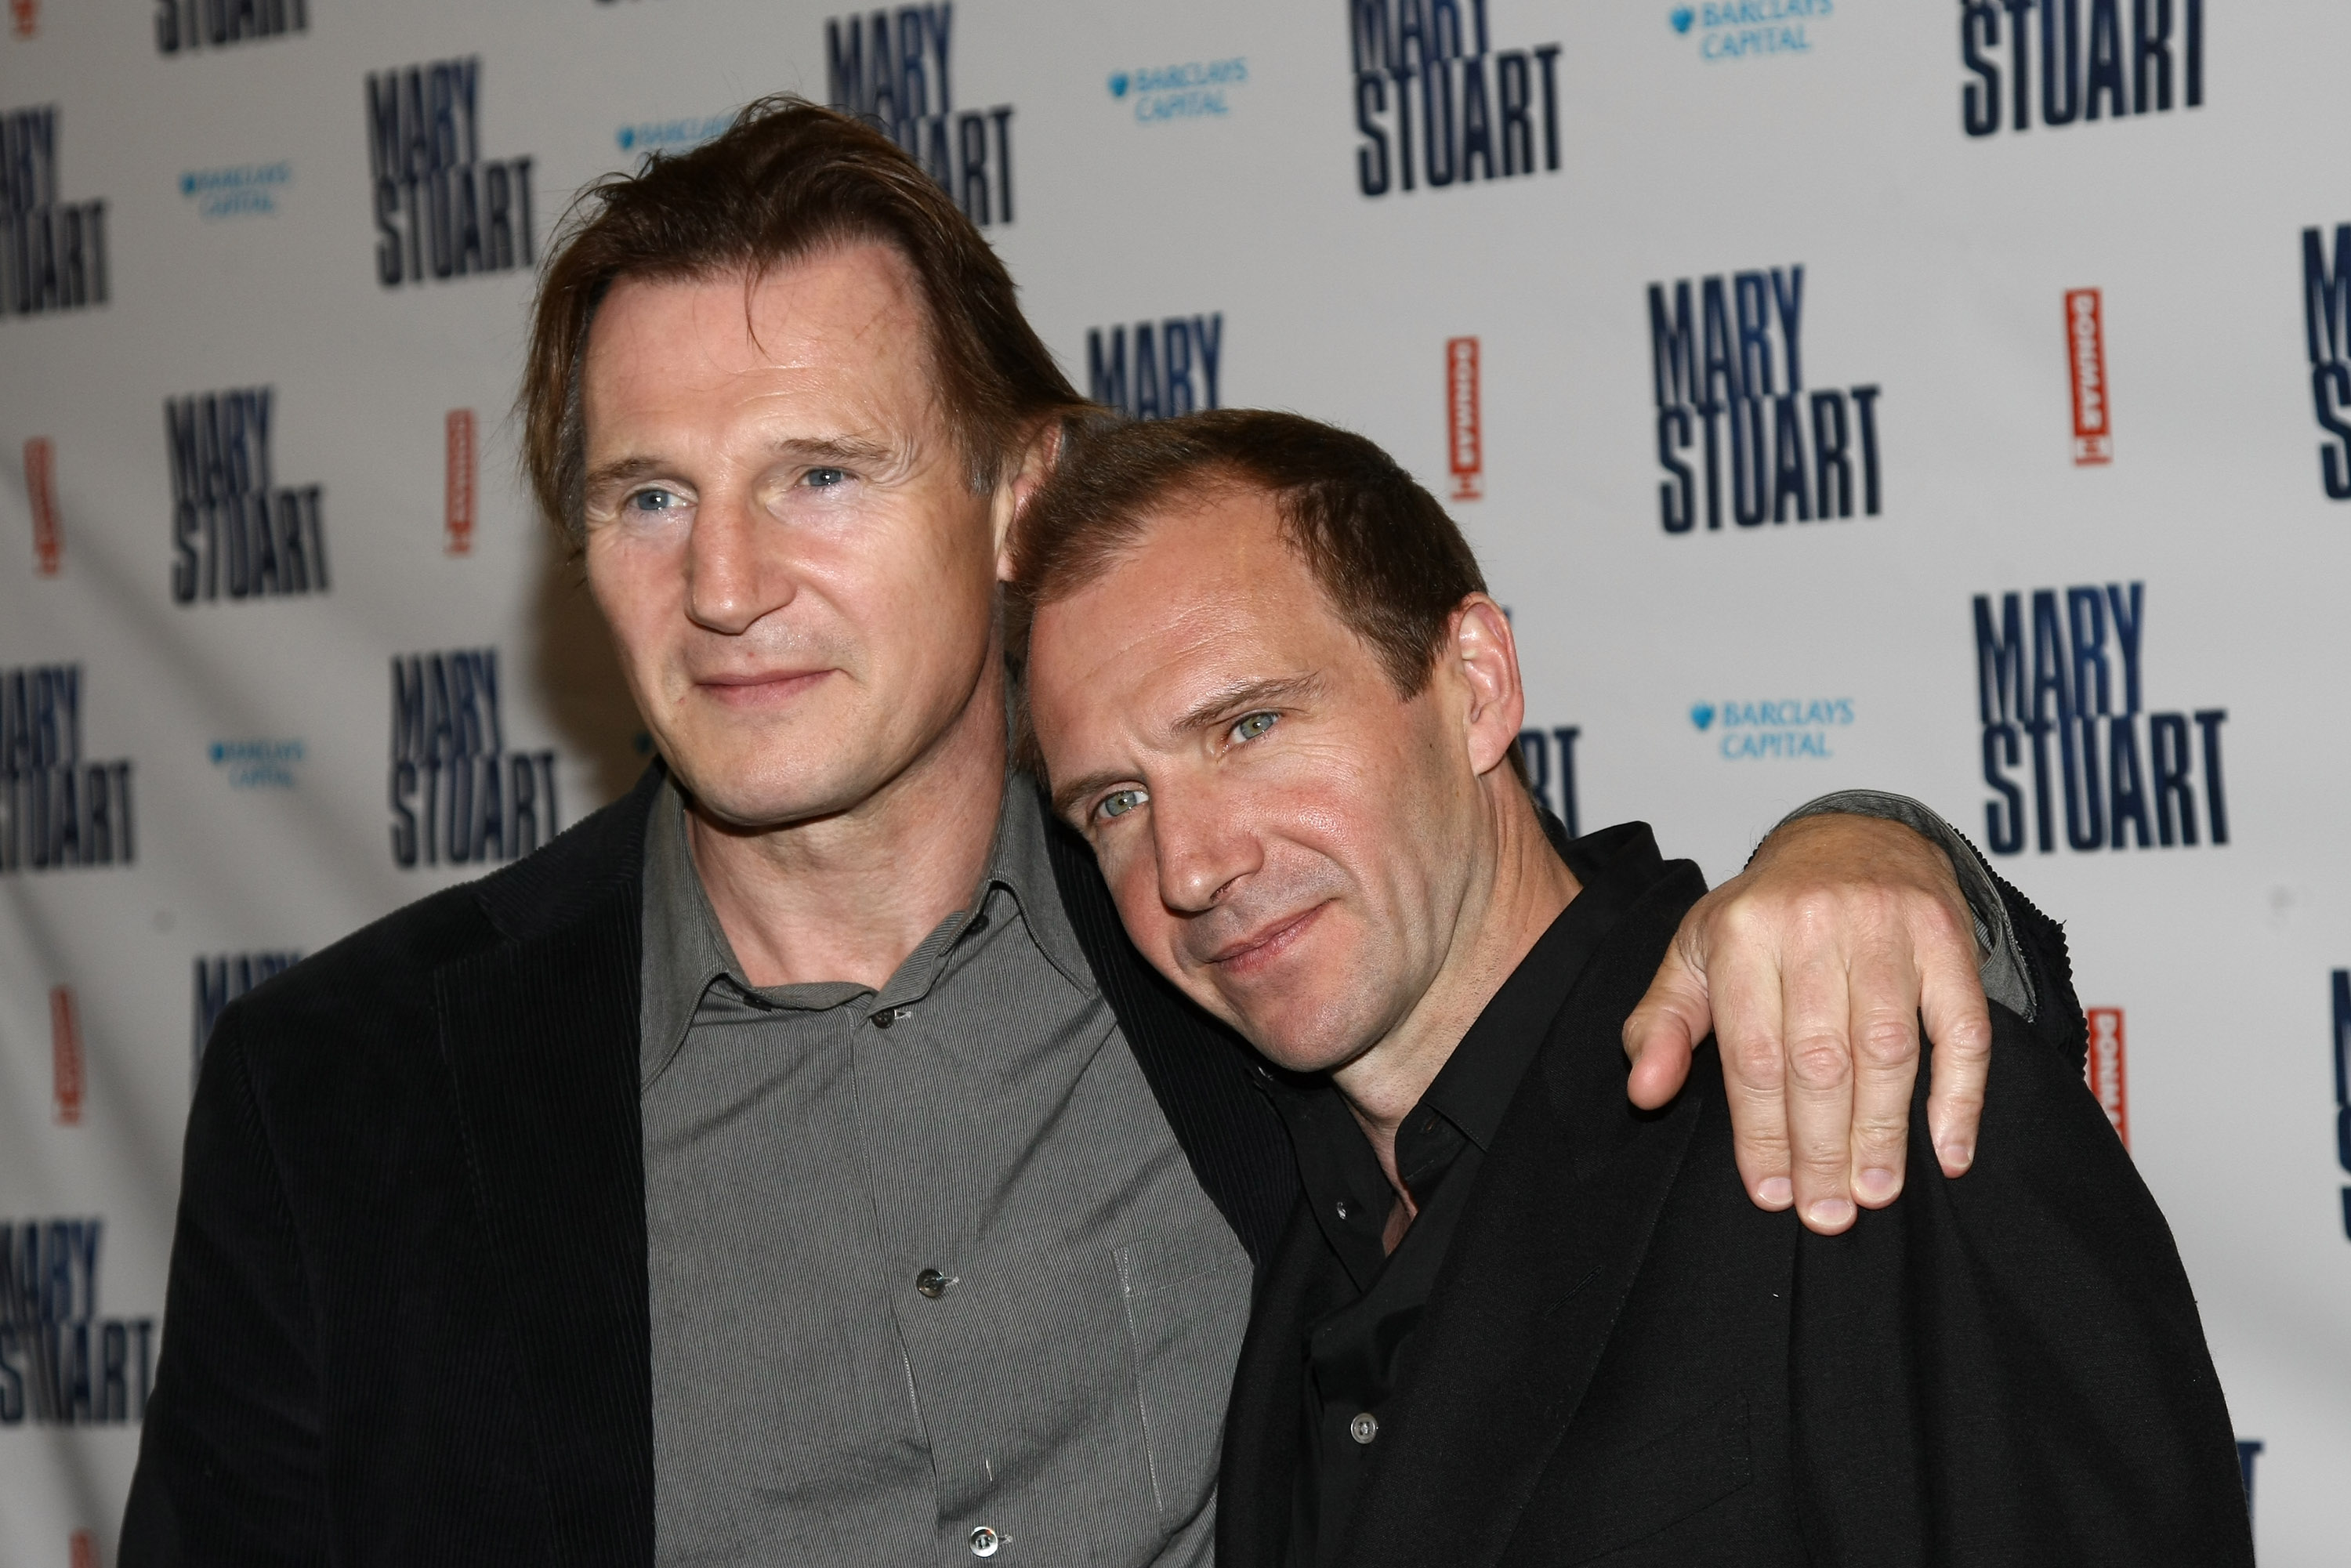 Liam Neeson and Ralph Fiennes in April 2009 in New York City. | Source: Getty Images